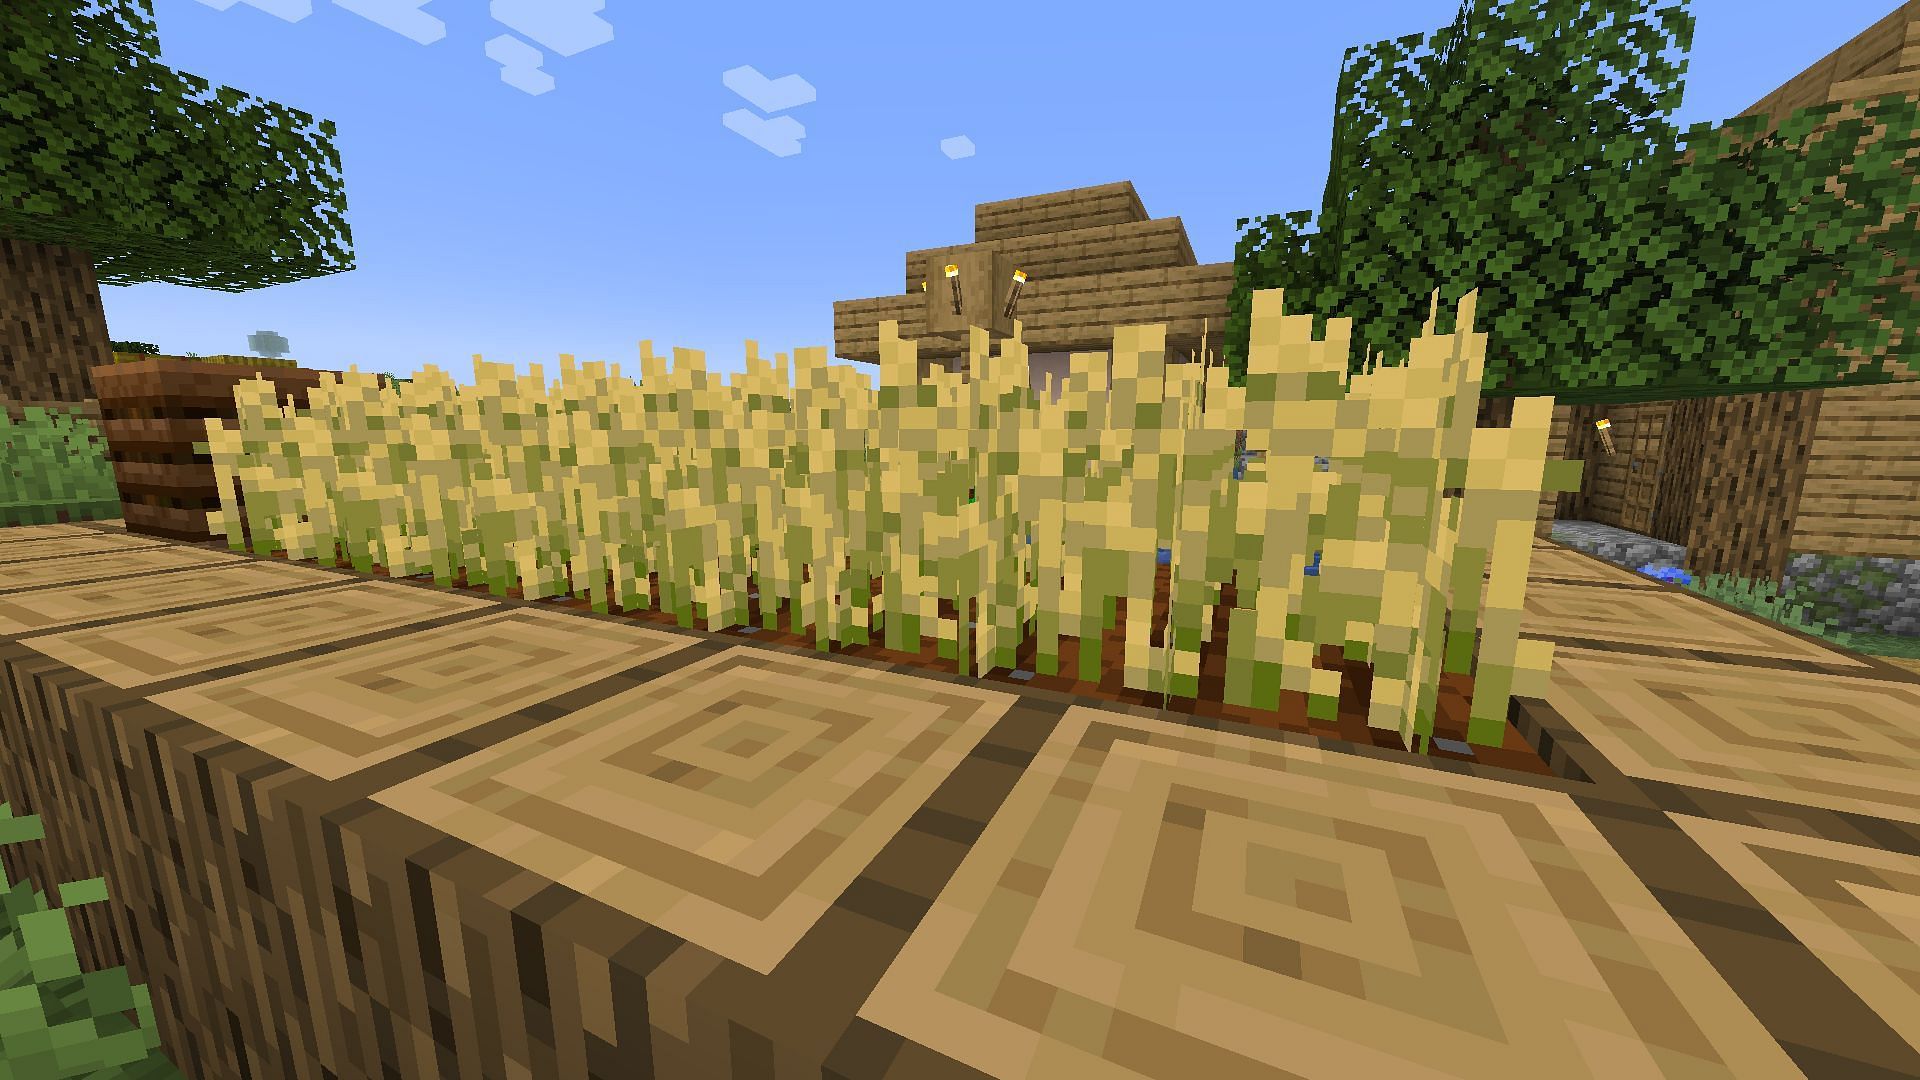 Wheat seeds can be obtained by breaking grass on grass blocks (Image via Minecraft 1.19 update)